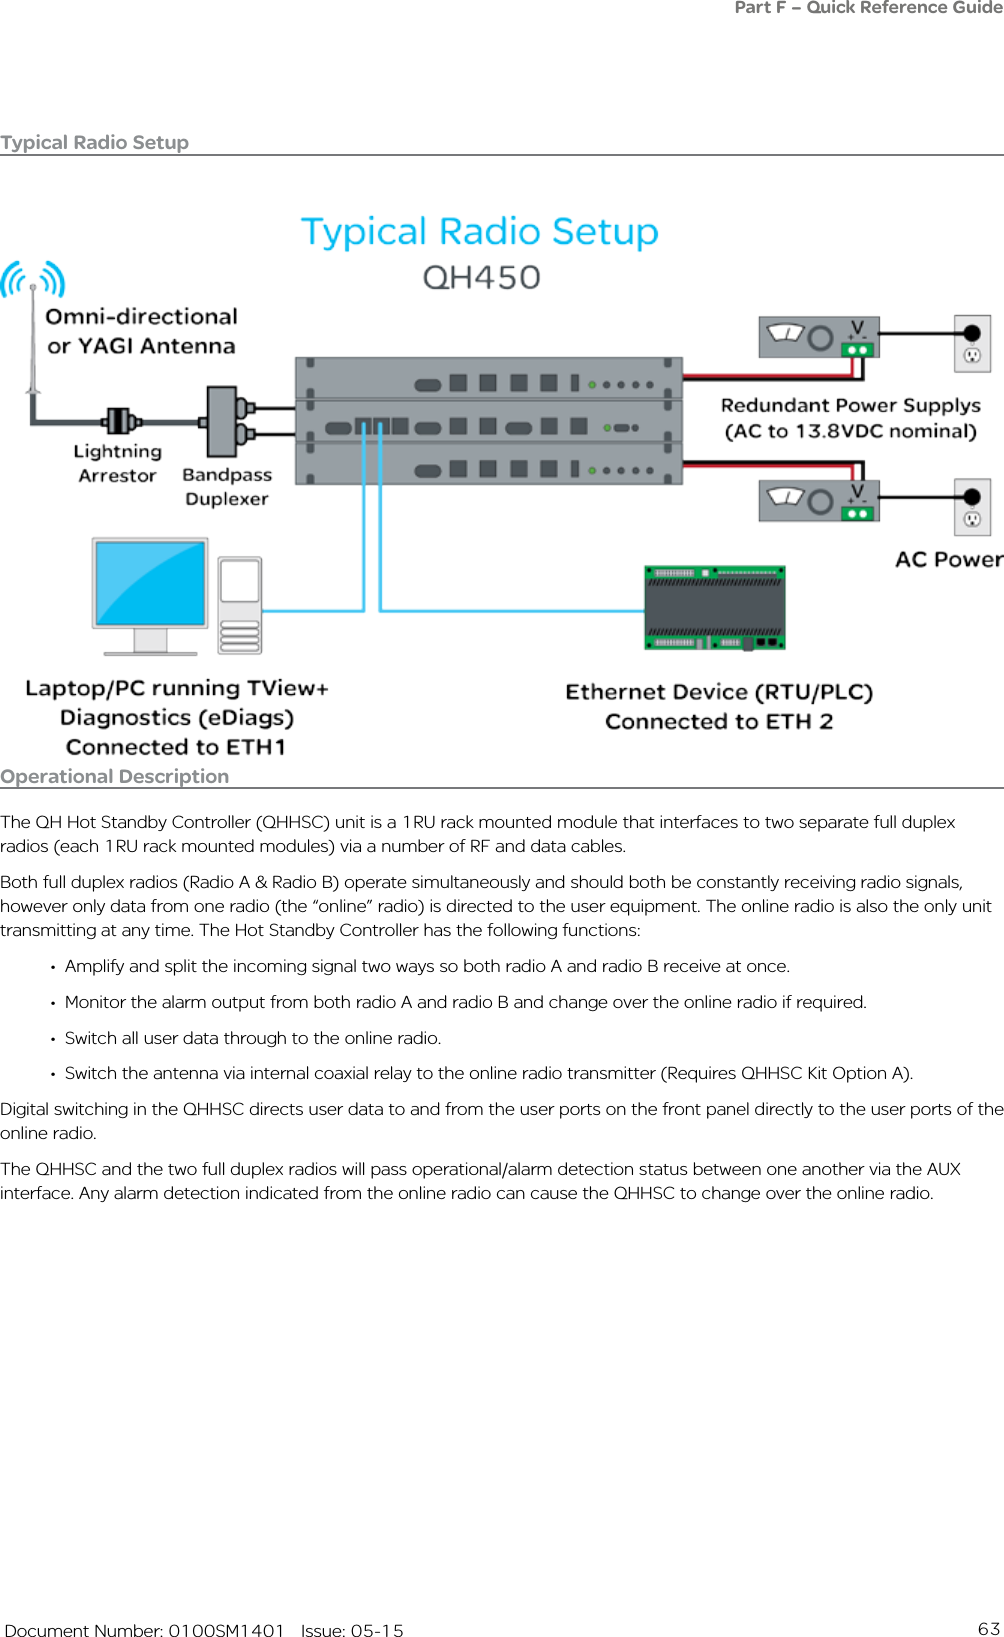 63   Document Number: 0100SM1401   Issue: 05-15Typical Radio Setup Operational DescriptionThe QH Hot Standby Controller (QHHSC) unit is a 1RU rack mounted module that interfaces to two separate full duplex radios (each 1RU rack mounted modules) via a number of RF and data cables.Both full duplex radios (Radio A &amp; Radio B) operate simultaneously and should both be constantly receiving radio signals, however only data from one radio (the “online” radio) is directed to the user equipment. The online radio is also the only unit transmitting at any time. The Hot Standby Controller has the following functions:•  Amplify and split the incoming signal two ways so both radio A and radio B receive at once.•  Monitor the alarm output from both radio A and radio B and change over the online radio if required.•  Switch all user data through to the online radio.•  Switch the antenna via internal coaxial relay to the online radio transmitter (Requires QHHSC Kit Option A).Digital switching in the QHHSC directs user data to and from the user ports on the front panel directly to the user ports of the online radio.The QHHSC and the two full duplex radios will pass operational/alarm detection status between one another via the AUX interface. Any alarm detection indicated from the online radio can cause the QHHSC to change over the online radio.Part F – Quick Reference Guide